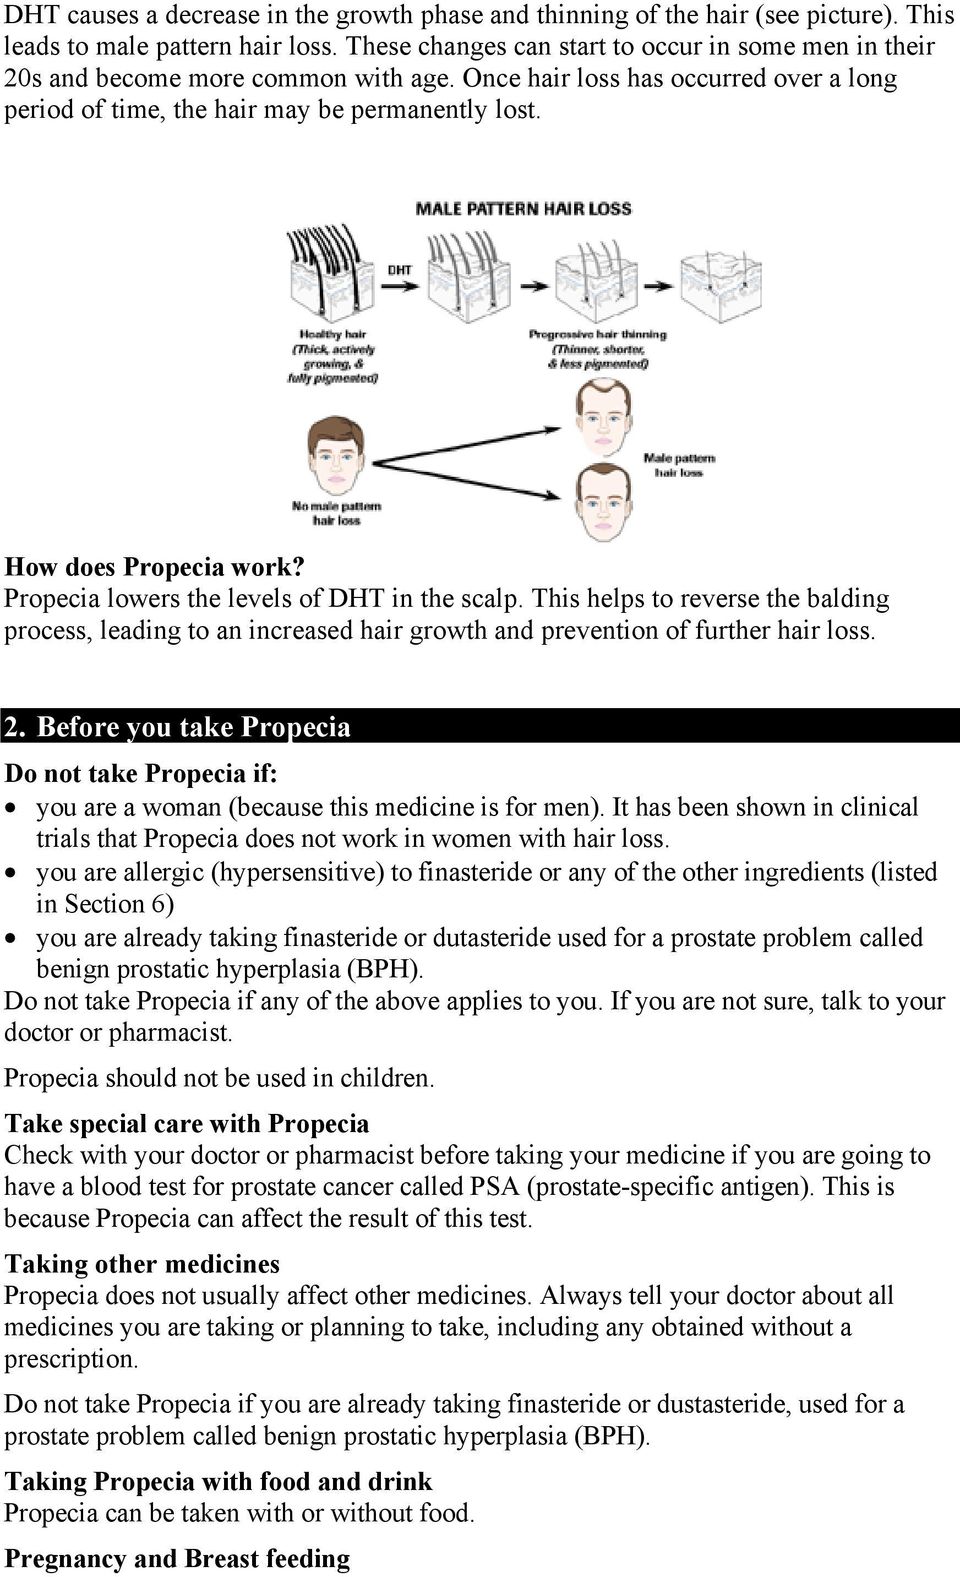 How does Propecia work? Propecia lowers the levels of DHT in the scalp. This helps to reverse the balding process, leading to an increased hair growth and prevention of further hair loss. 2.